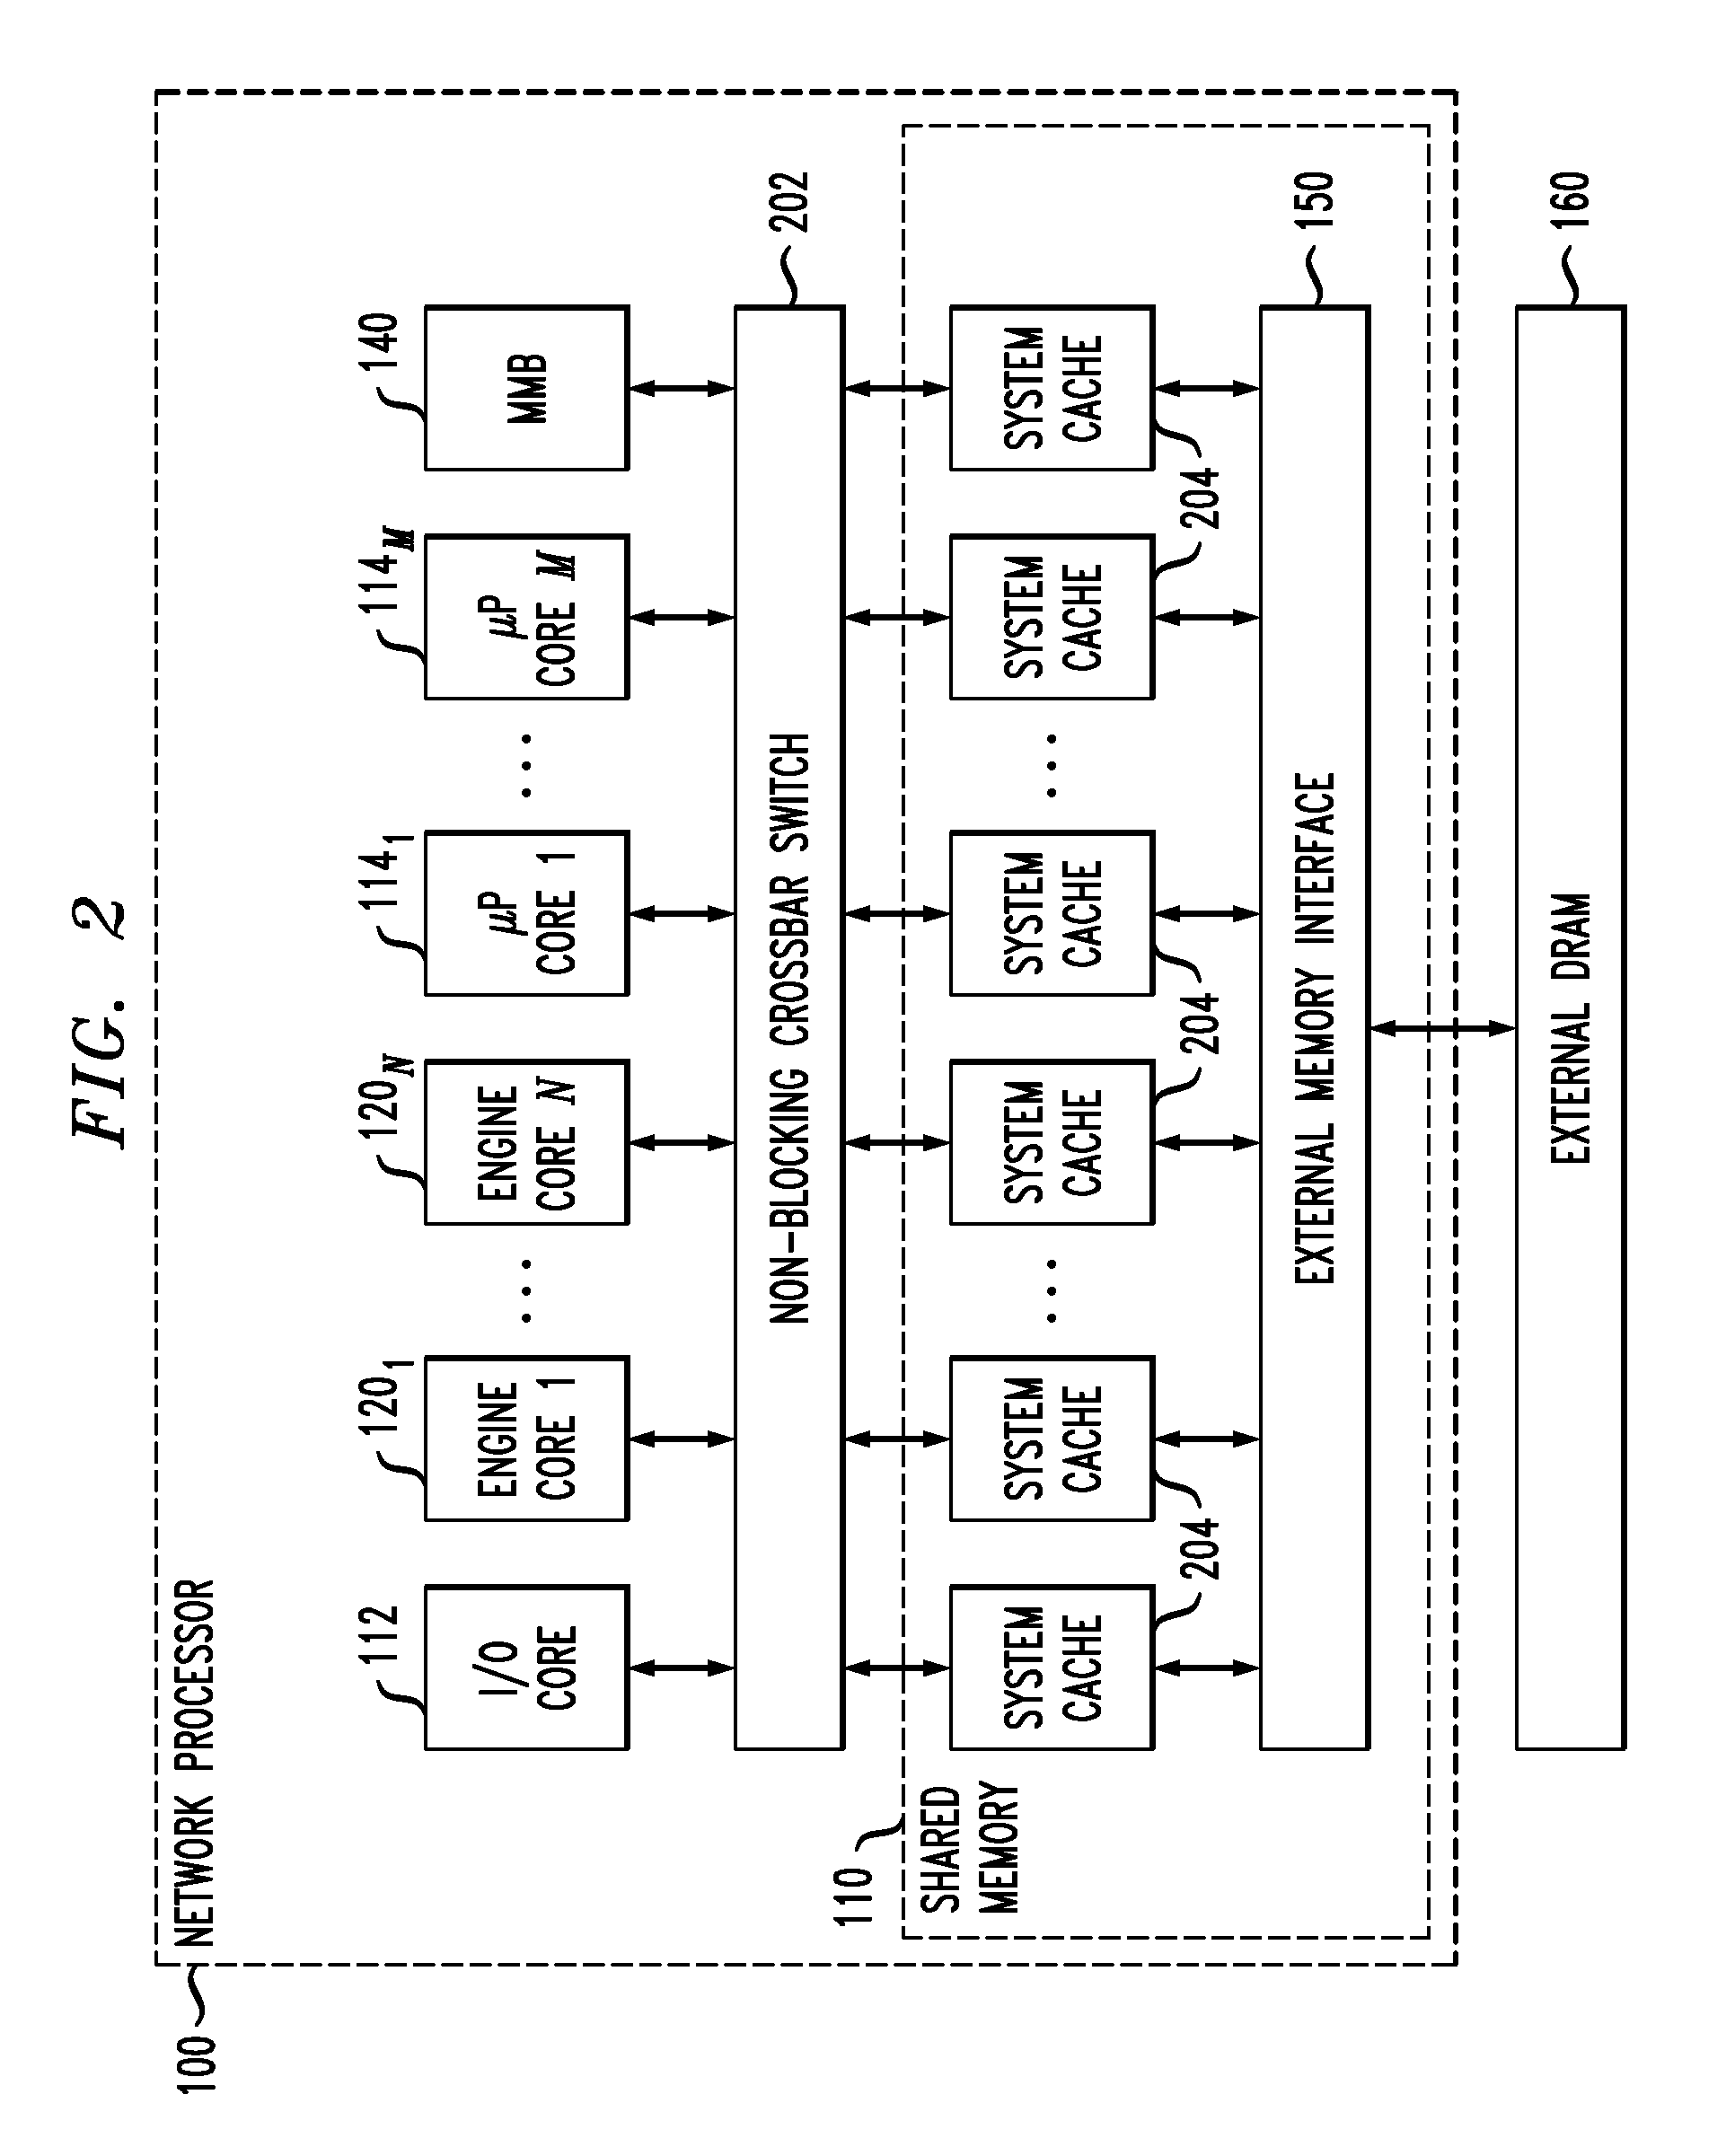 Task queuing in a network communications processor architecture